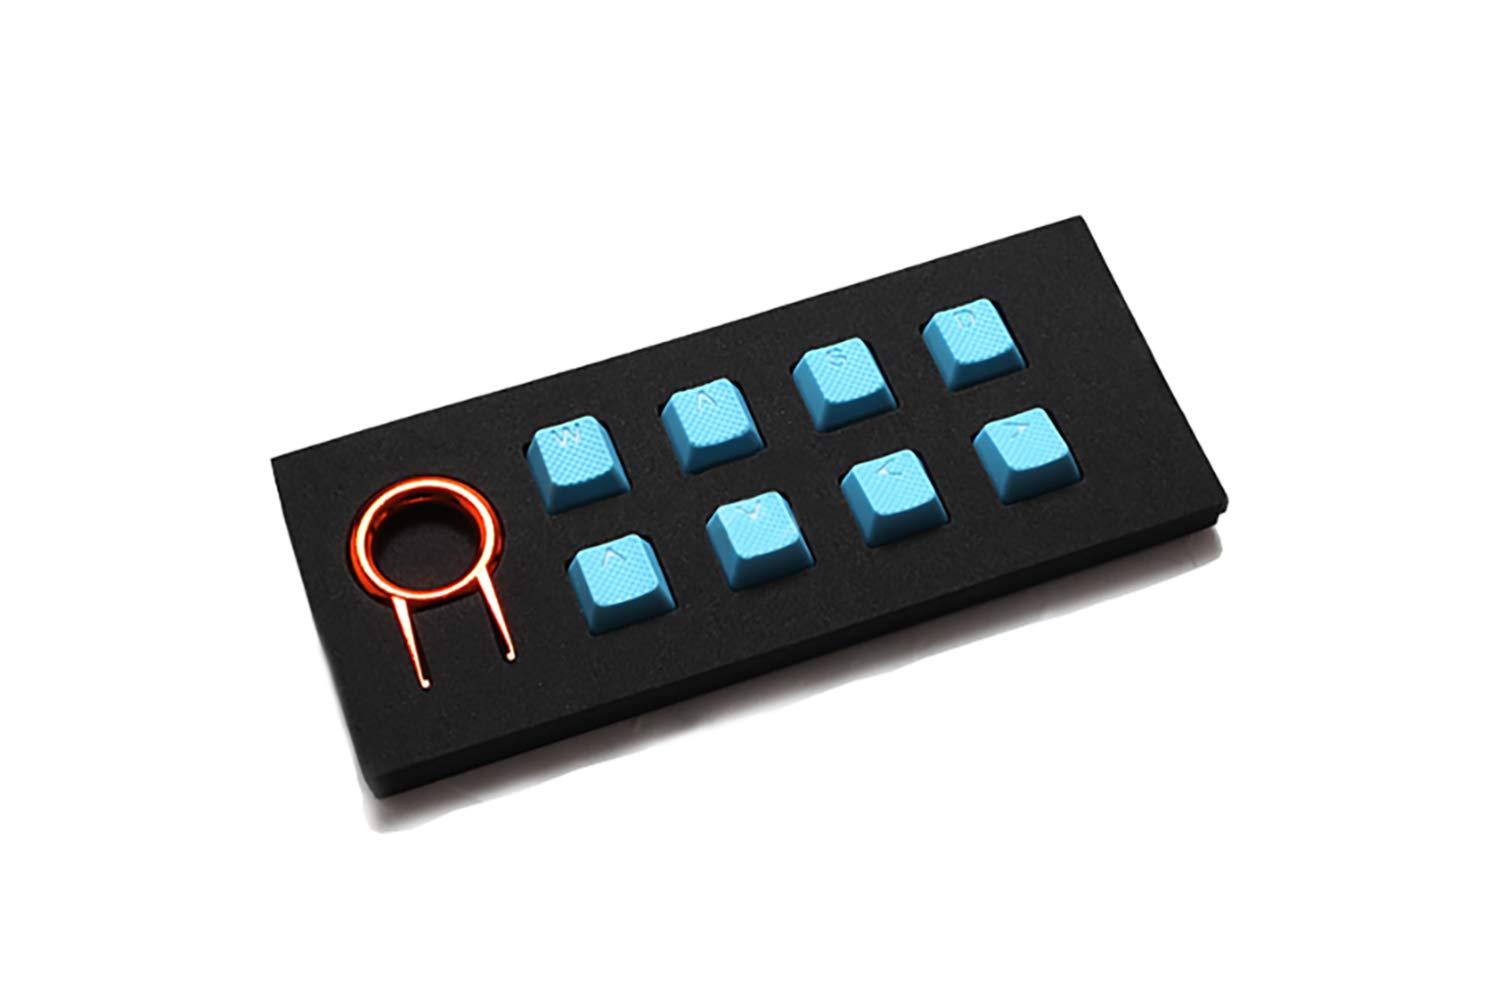 Tai-Hao 8 Key ABS Rubber Keycaps - Neon Blue - Store 974 | ستور ٩٧٤